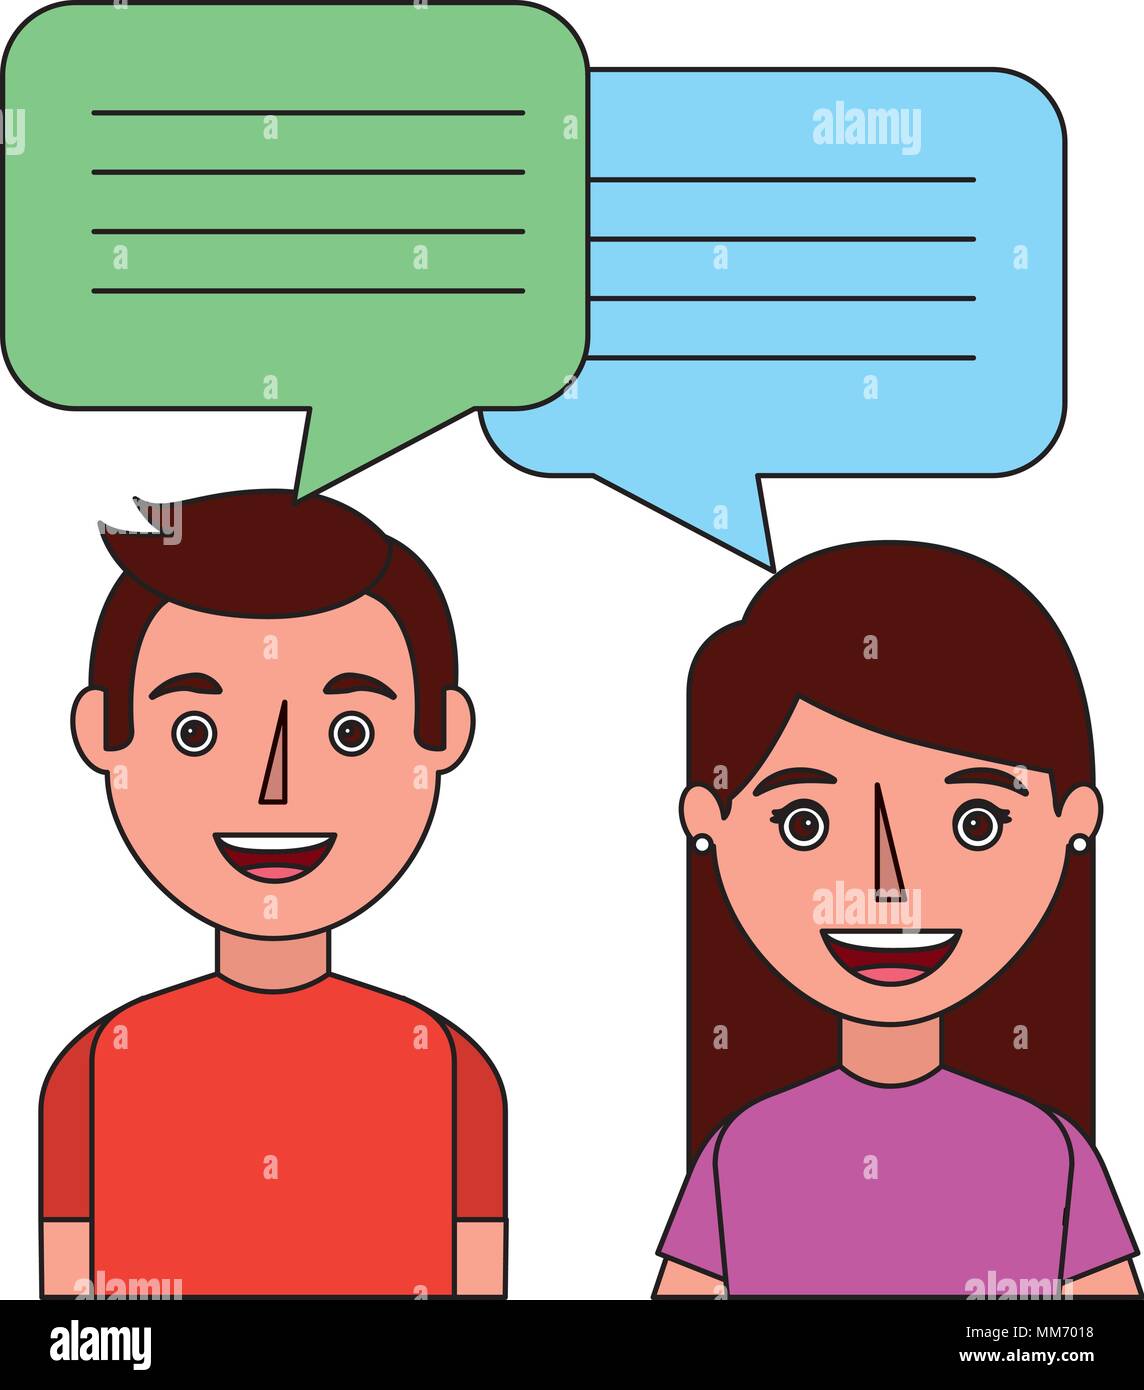 woman and man with dialog speech bubbles vector illustration Stock Vector